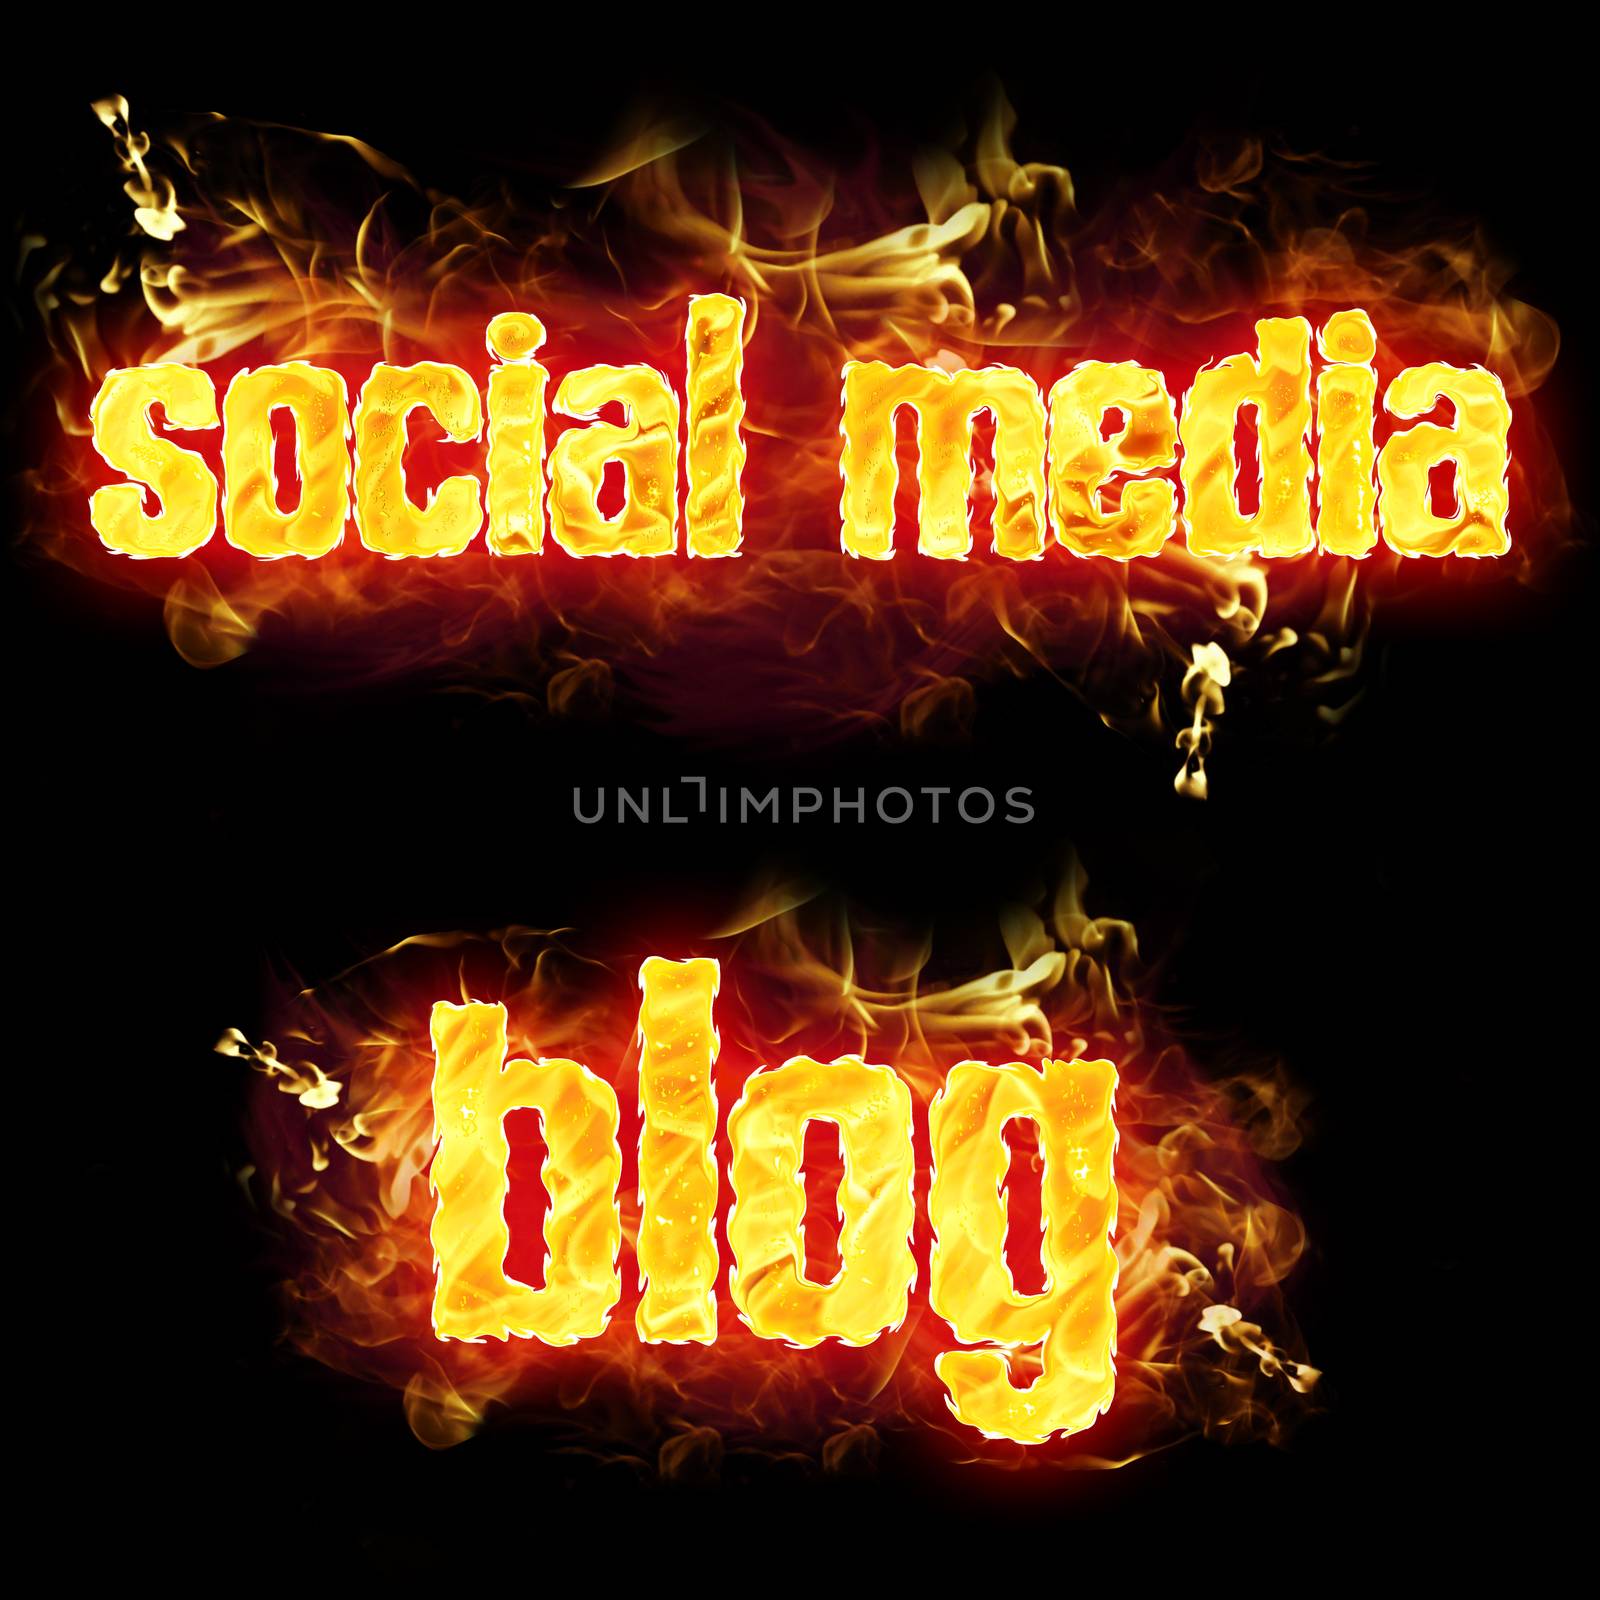 Fire social media blog text badge with burning flames.